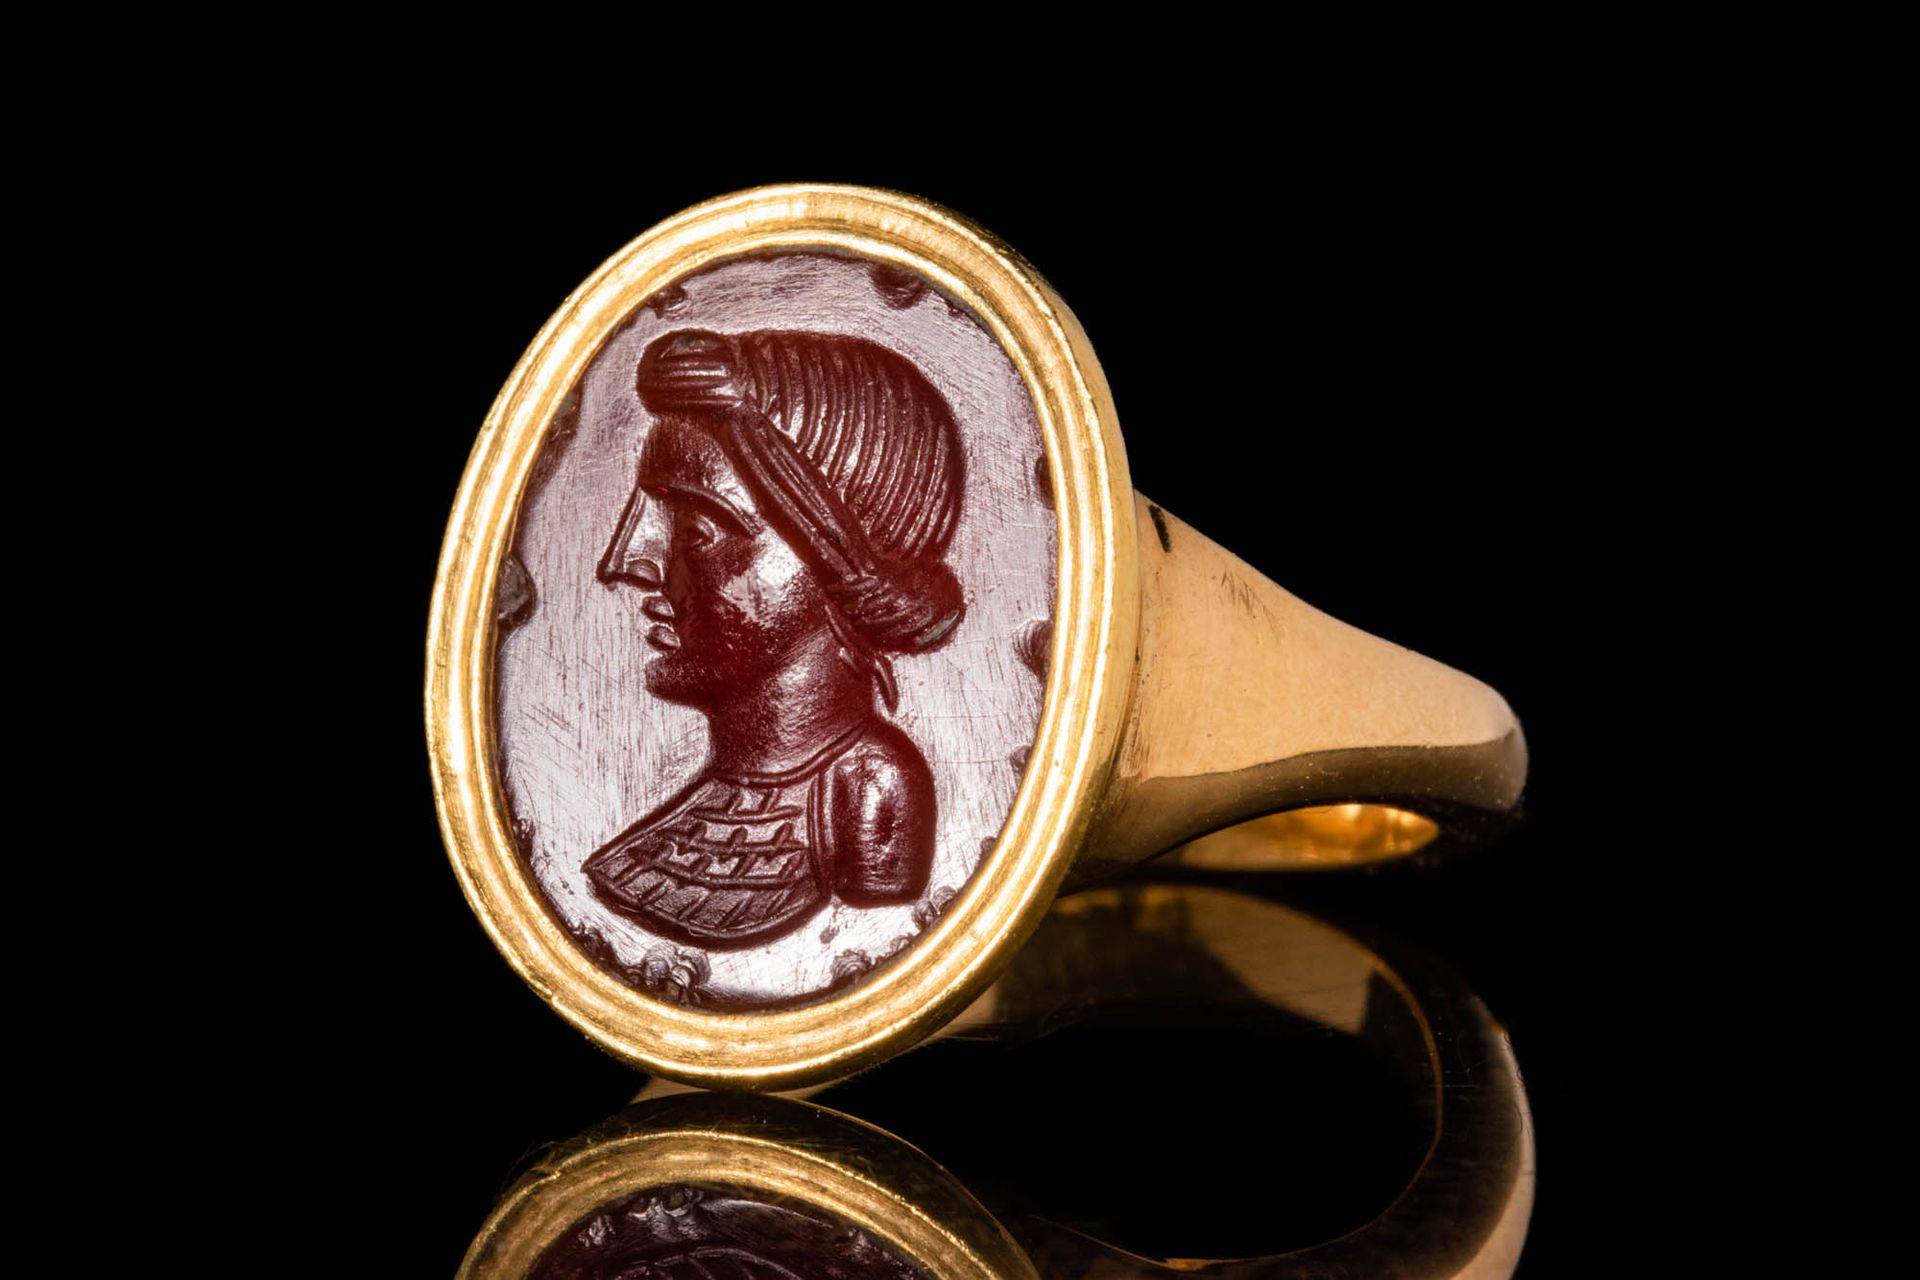 ROMAN CARNELIAN INTAGLIO DEPICTING A BUST OF WOMAN IN GOLD RING Ca. 1 - 100 D.C.&hellip;